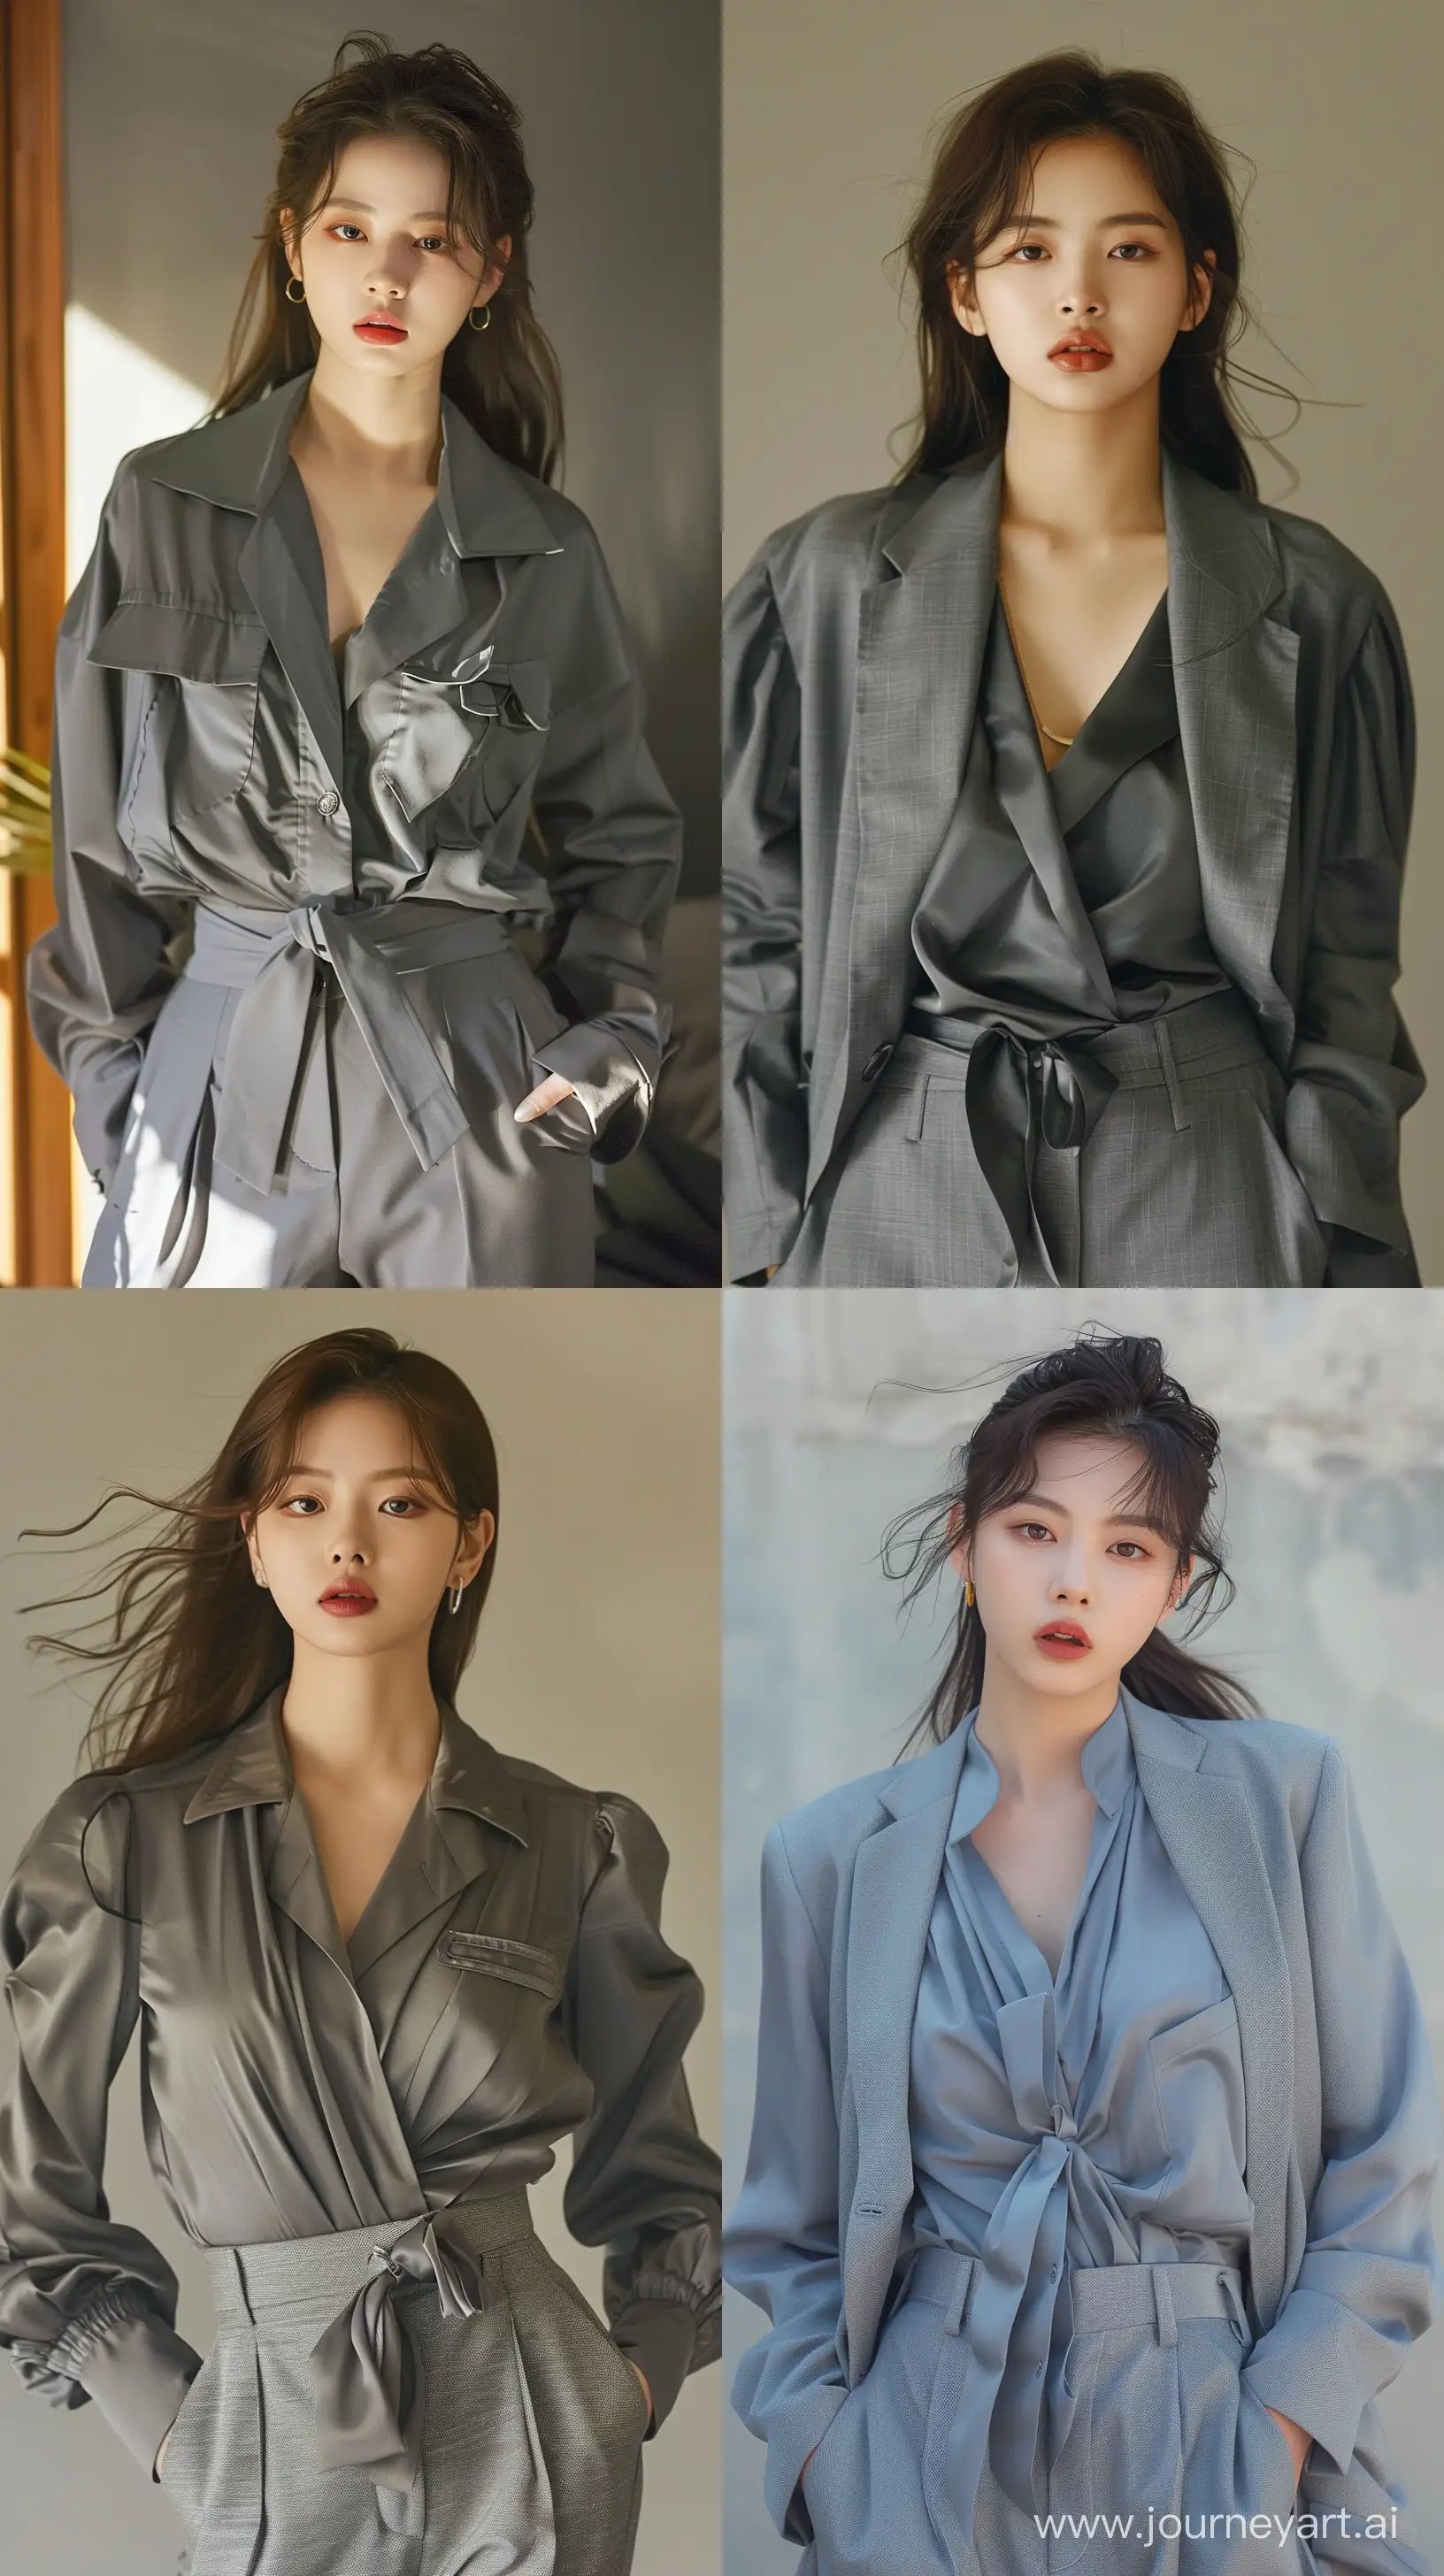 A beautiful Asian woman ,wearing grey oversize blouse and grey oversize suit pants a youthful appearance,fujifim shoot, and facial features resembling Blackpink's Jennie. --ar 9:16 --v 6